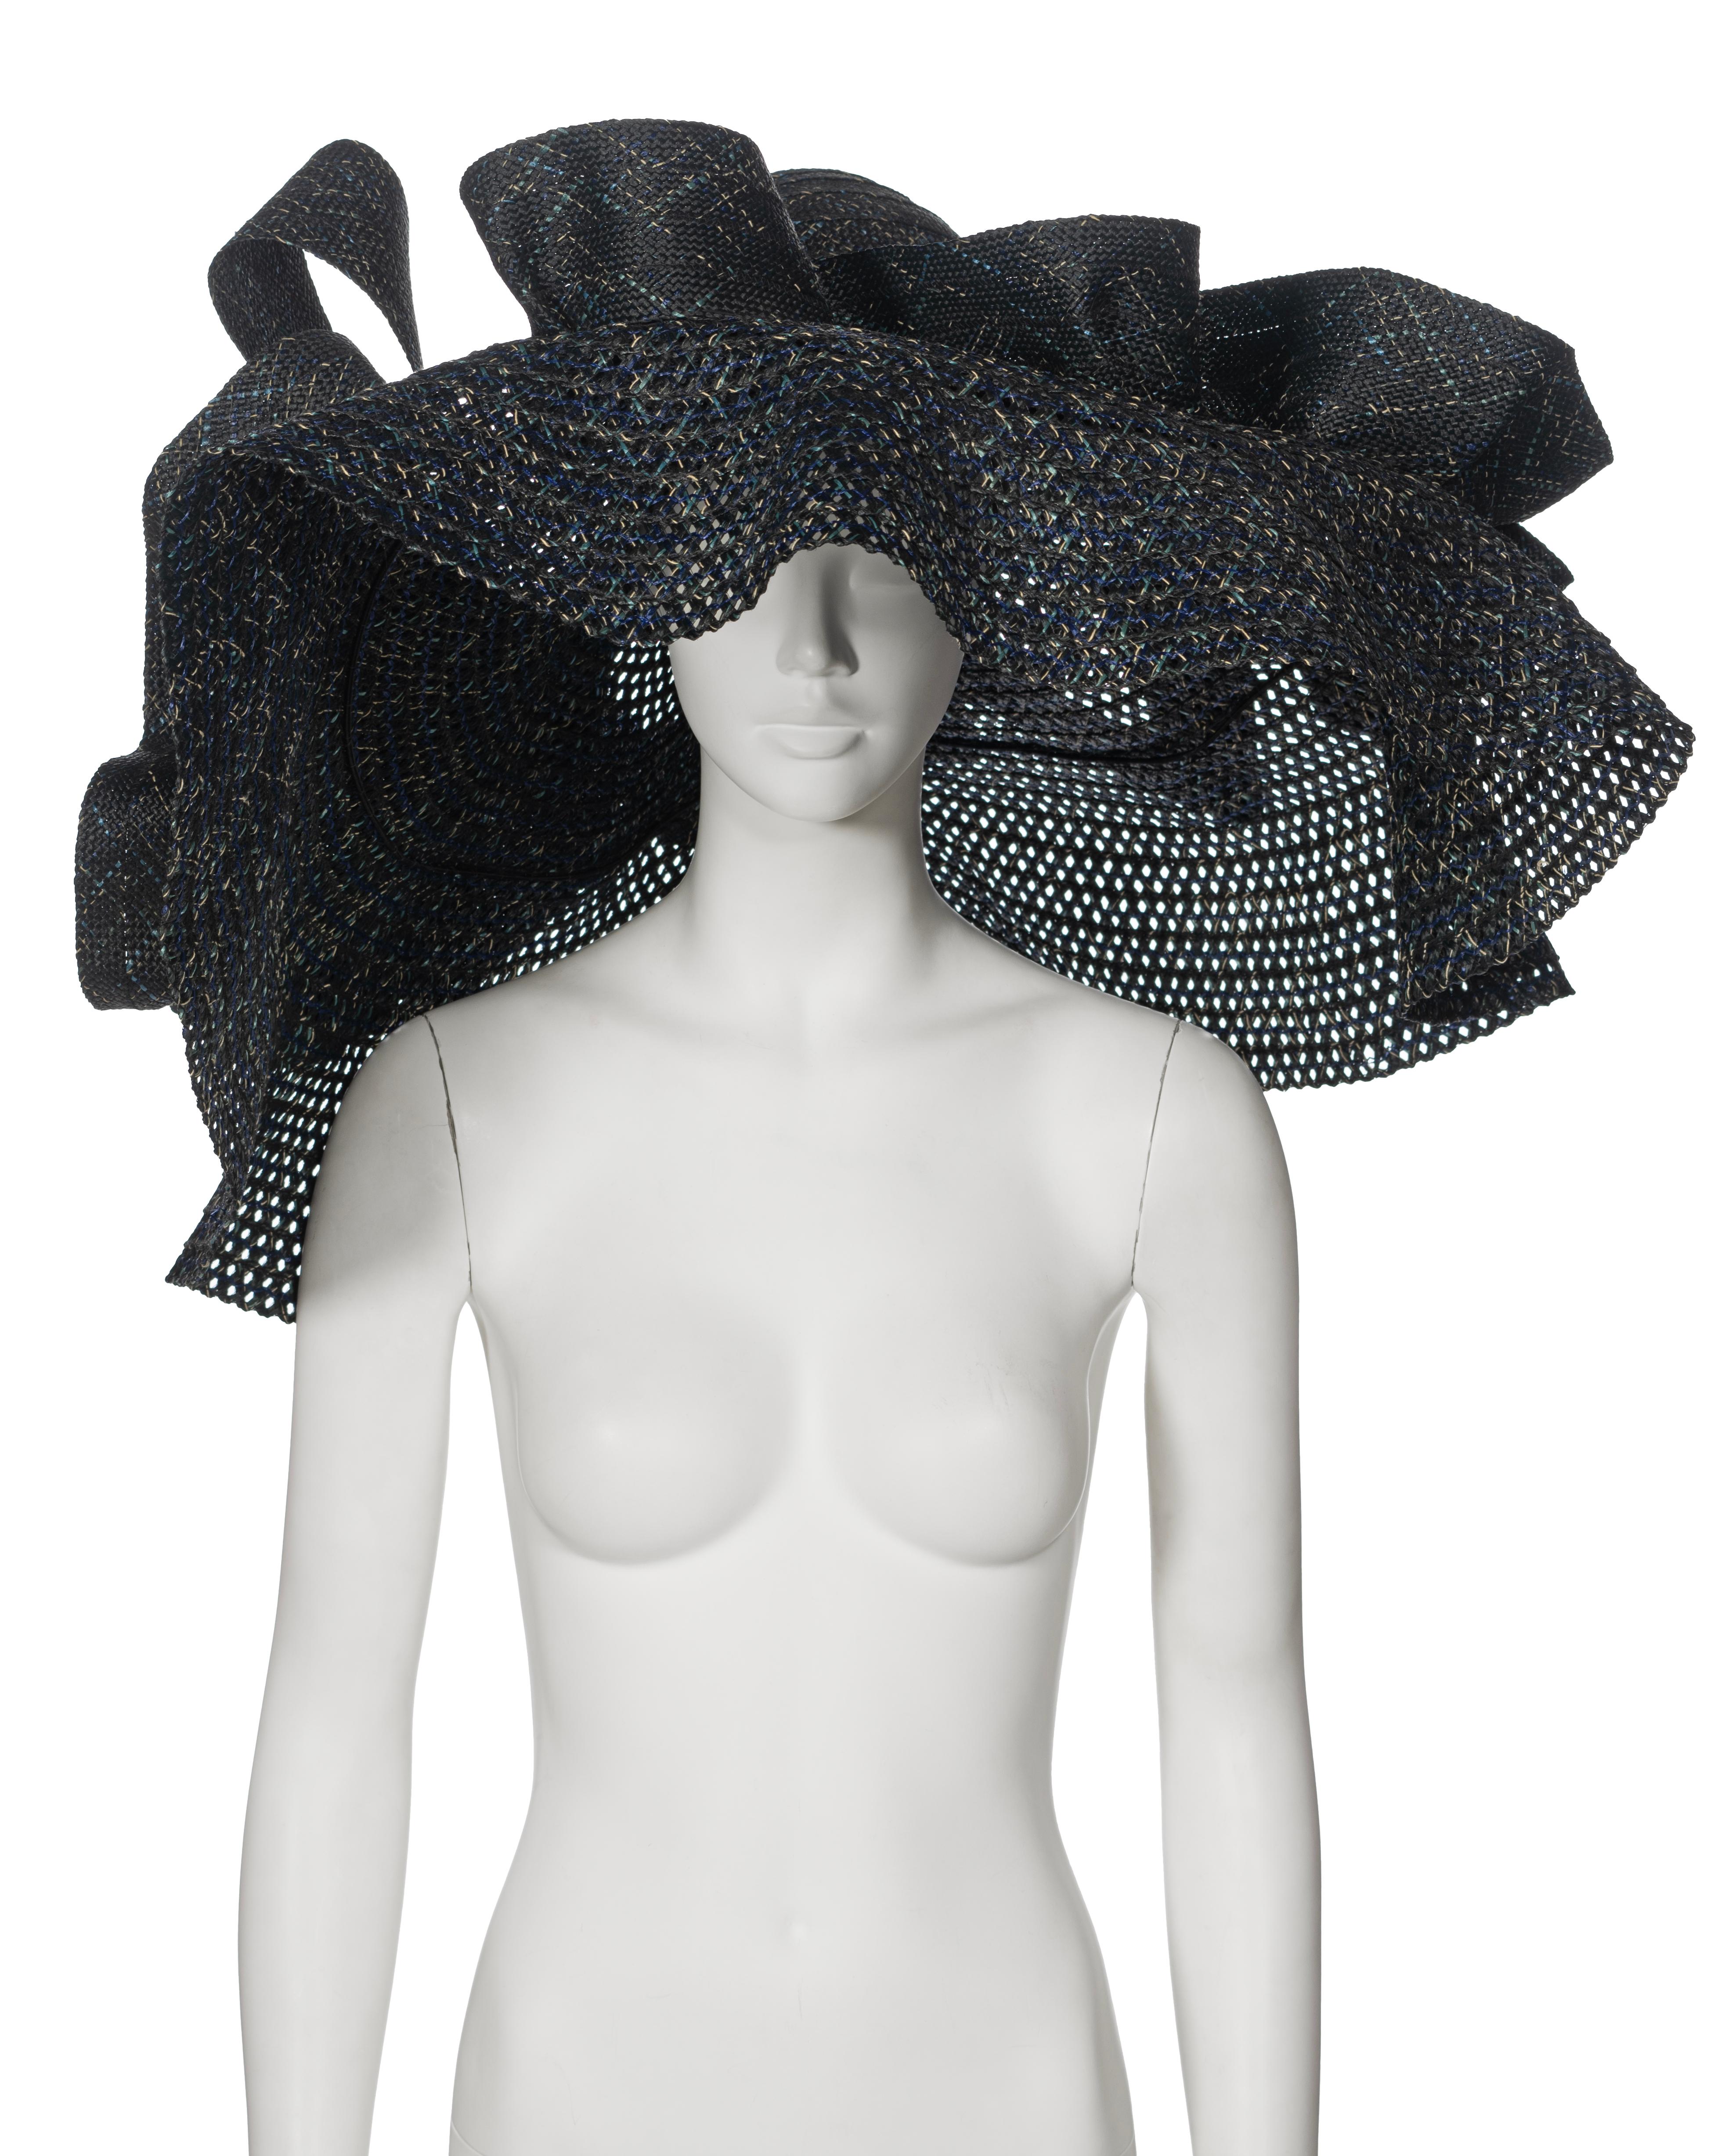 ▪ Archival Yohji Yamamoto Runway Hat
▪ Spring-Summer 1988
▪ Sold by One of a Kind Archive
▪ Woven raffia in black, blue, turquoise, and cream shades
▪  Extra-wide floppy brim, measuring up to 92cm in diameter
▪ Large hand-sewn self-fabric ruffles
▪